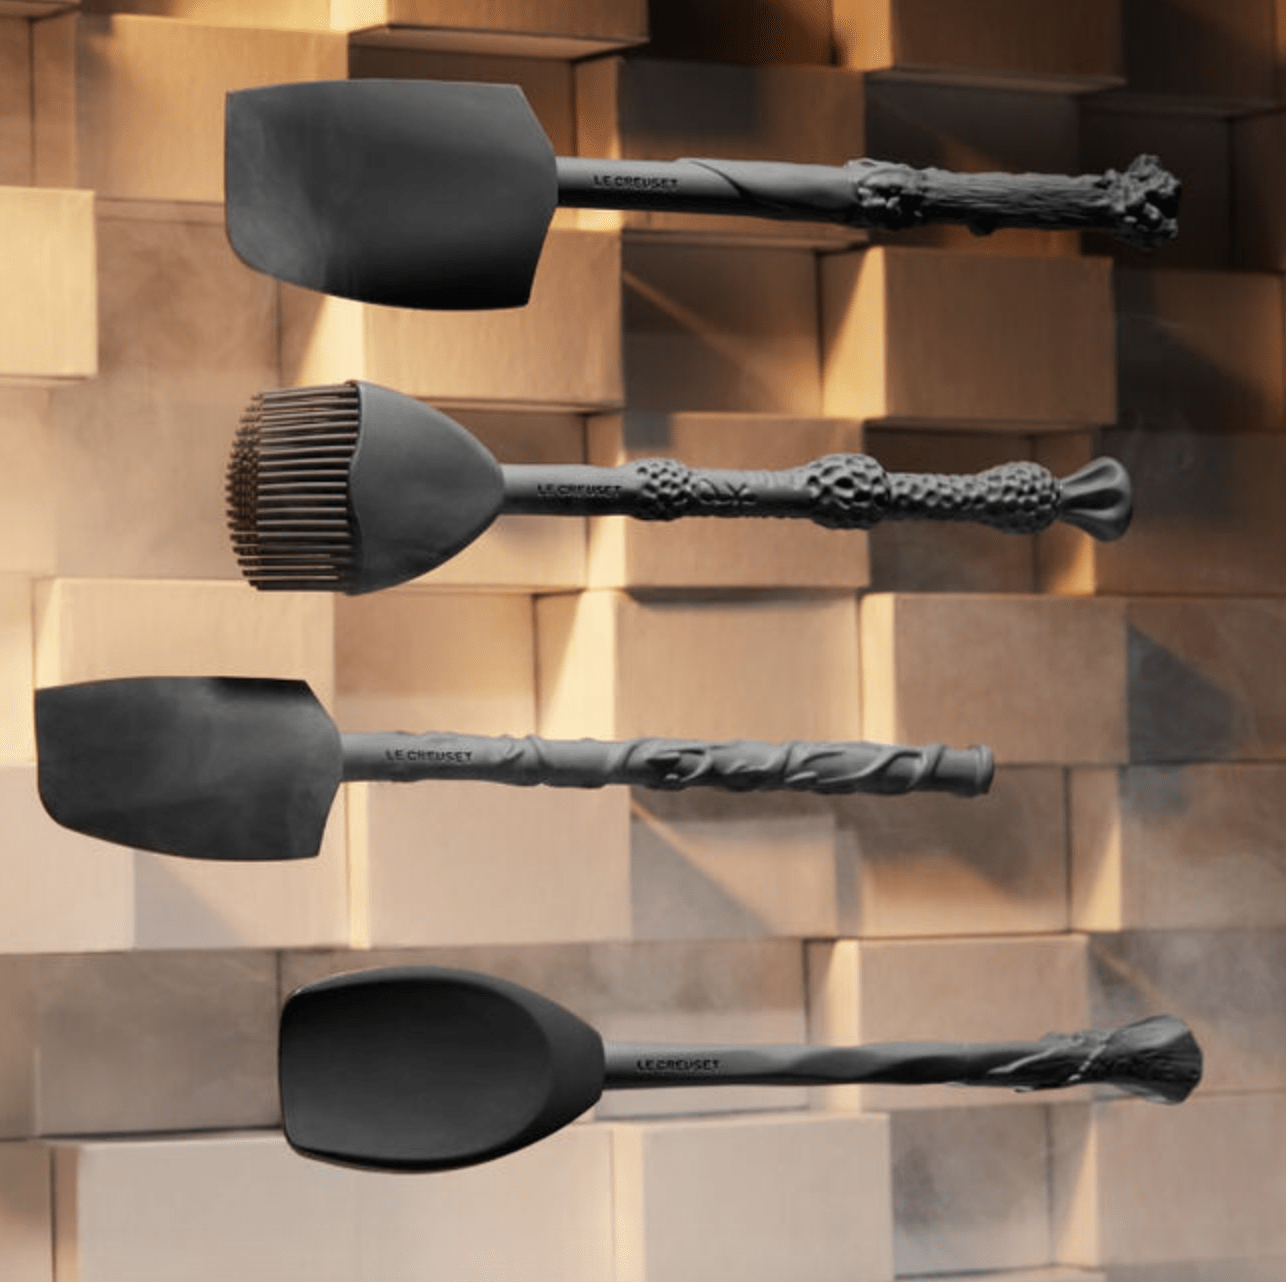 Le Creuset has a new Harry Potter range with a Hogwarts Express